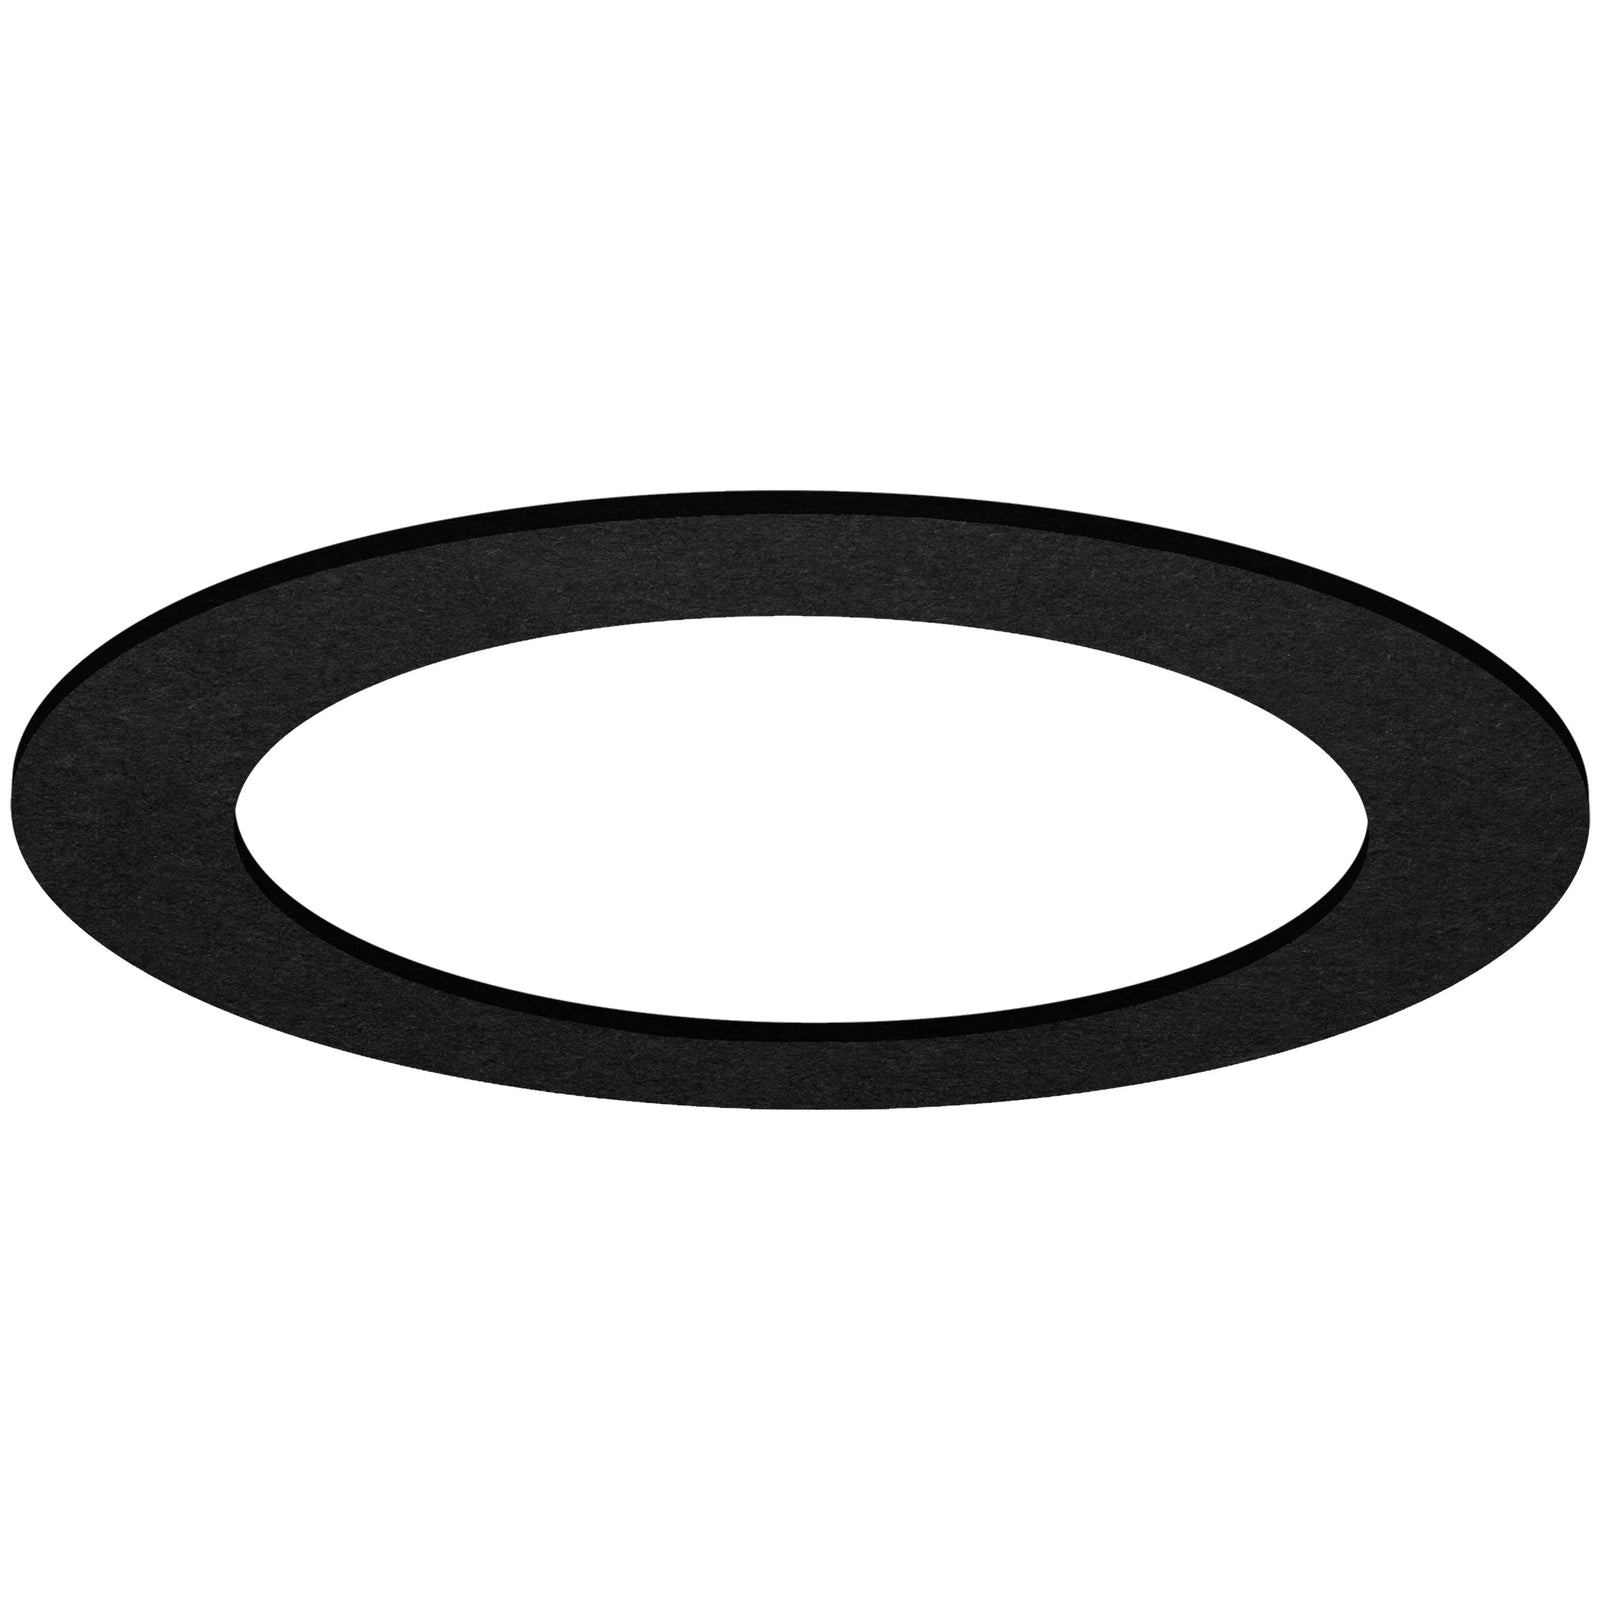 Black Goof Ring for 5/6 Inch Recessed Lights